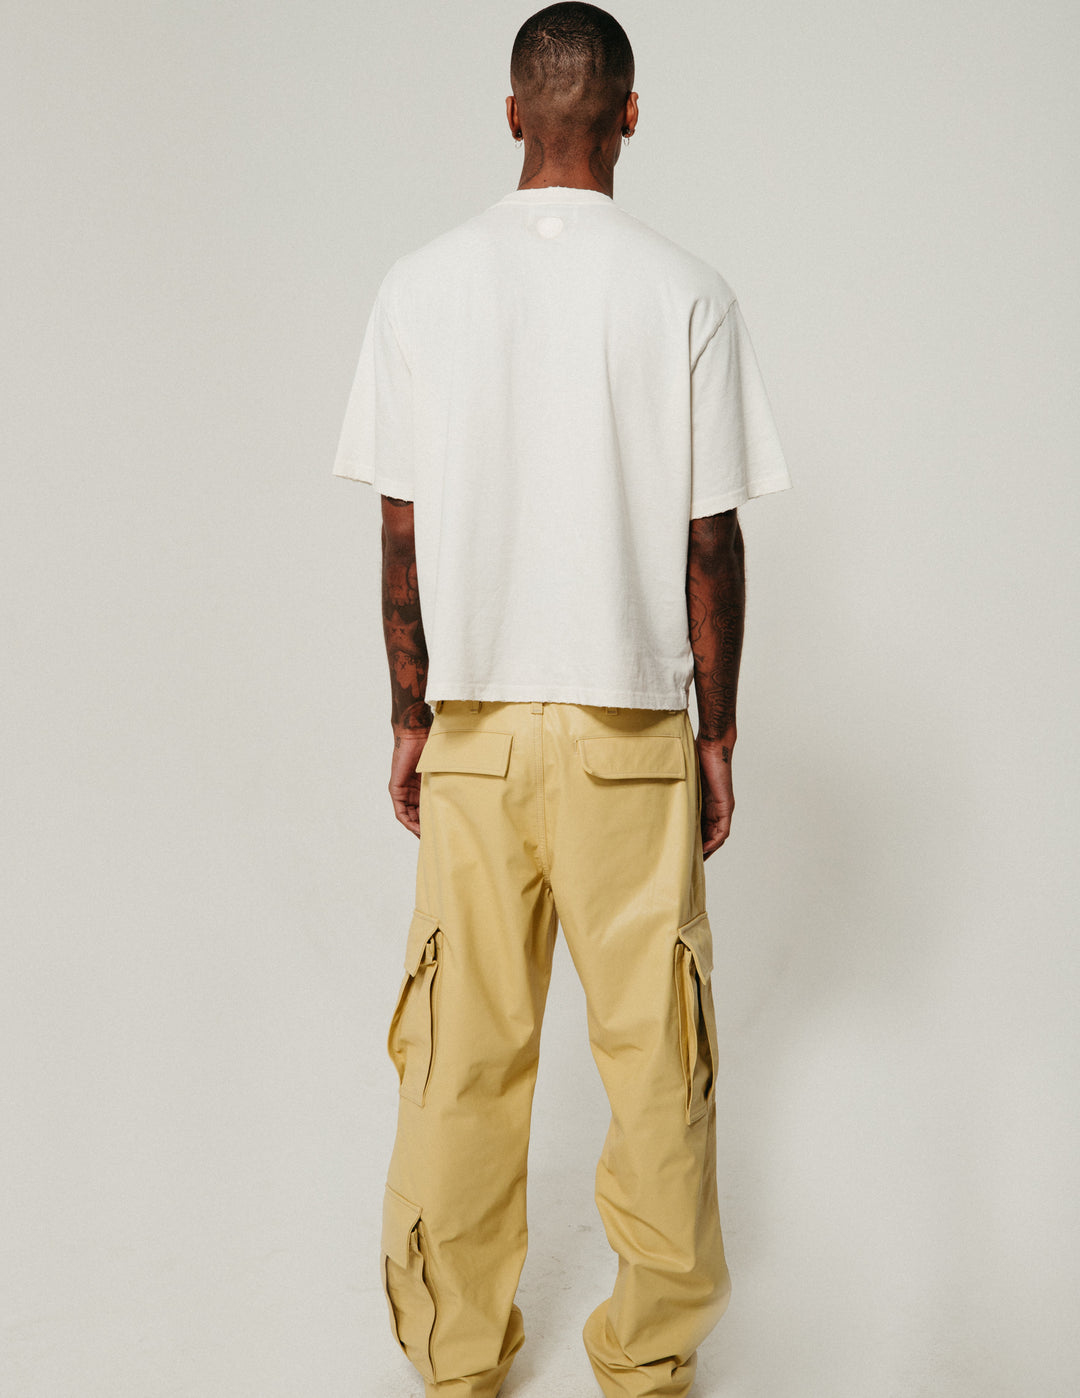 Not Your Average Cargo Pant